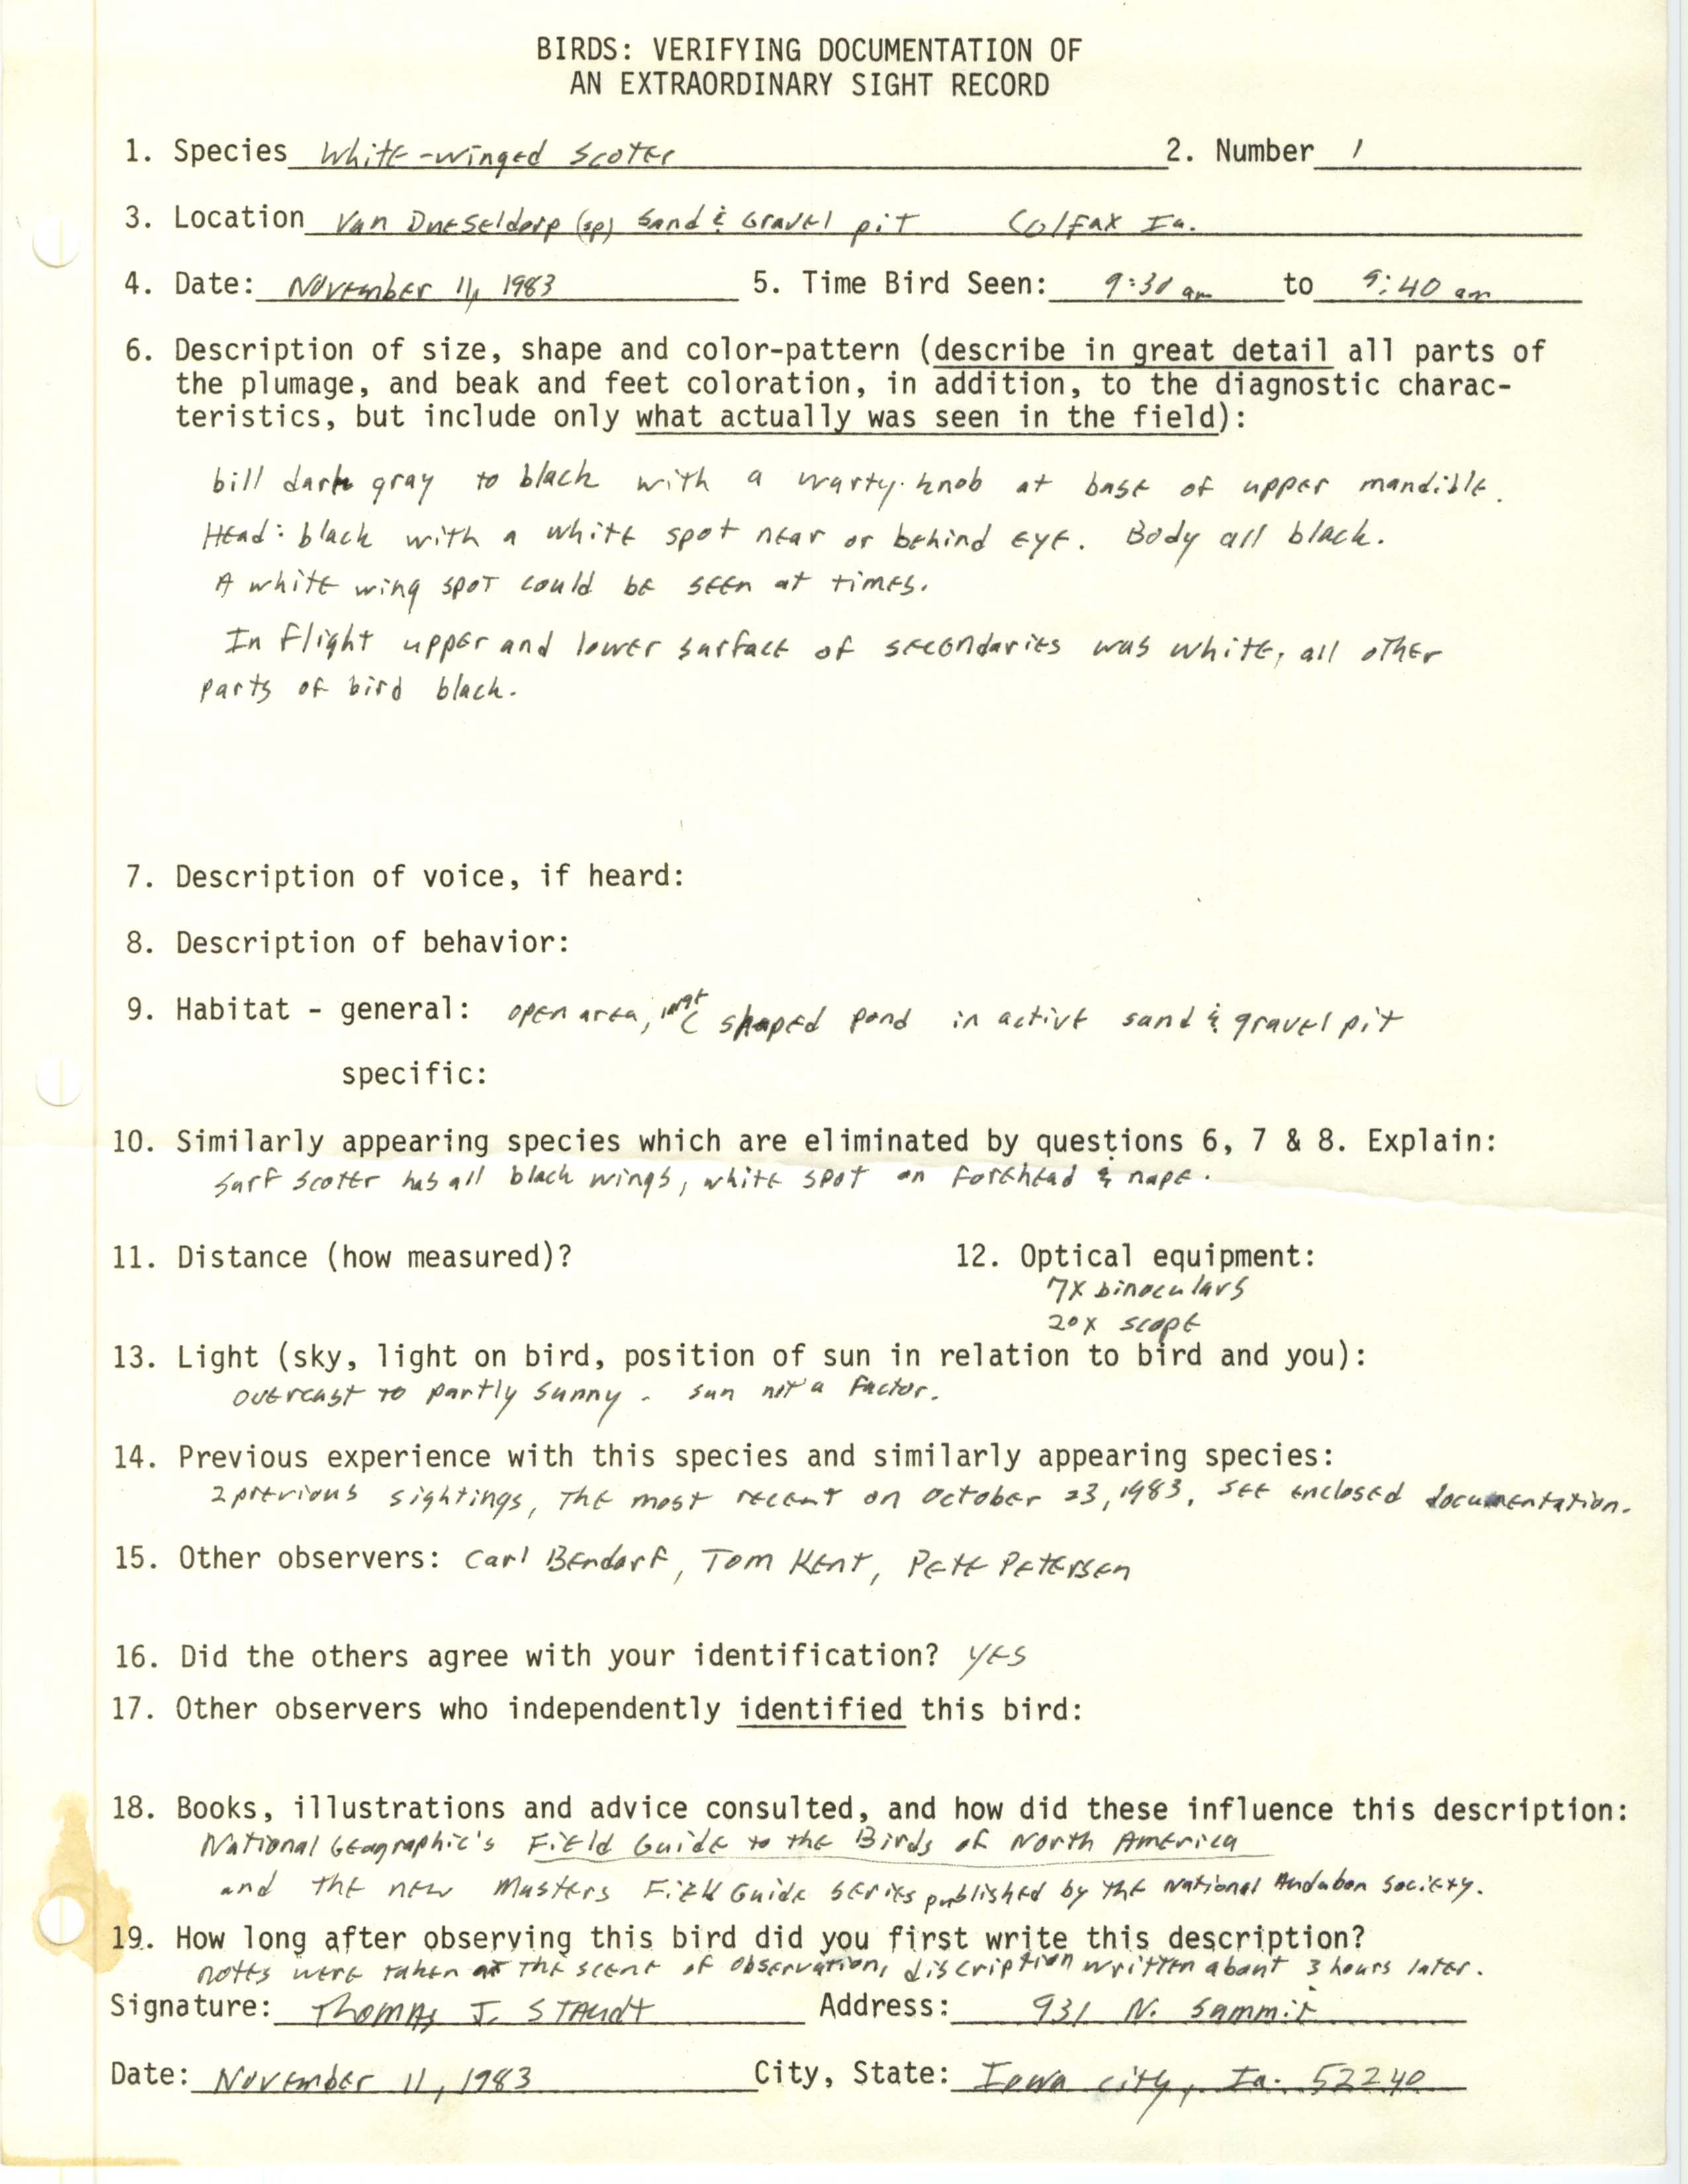 Rare bird documentation form for White-winged Scoter at Van Dueseldorp Sand and Gravel Pit in Colfax, 1983